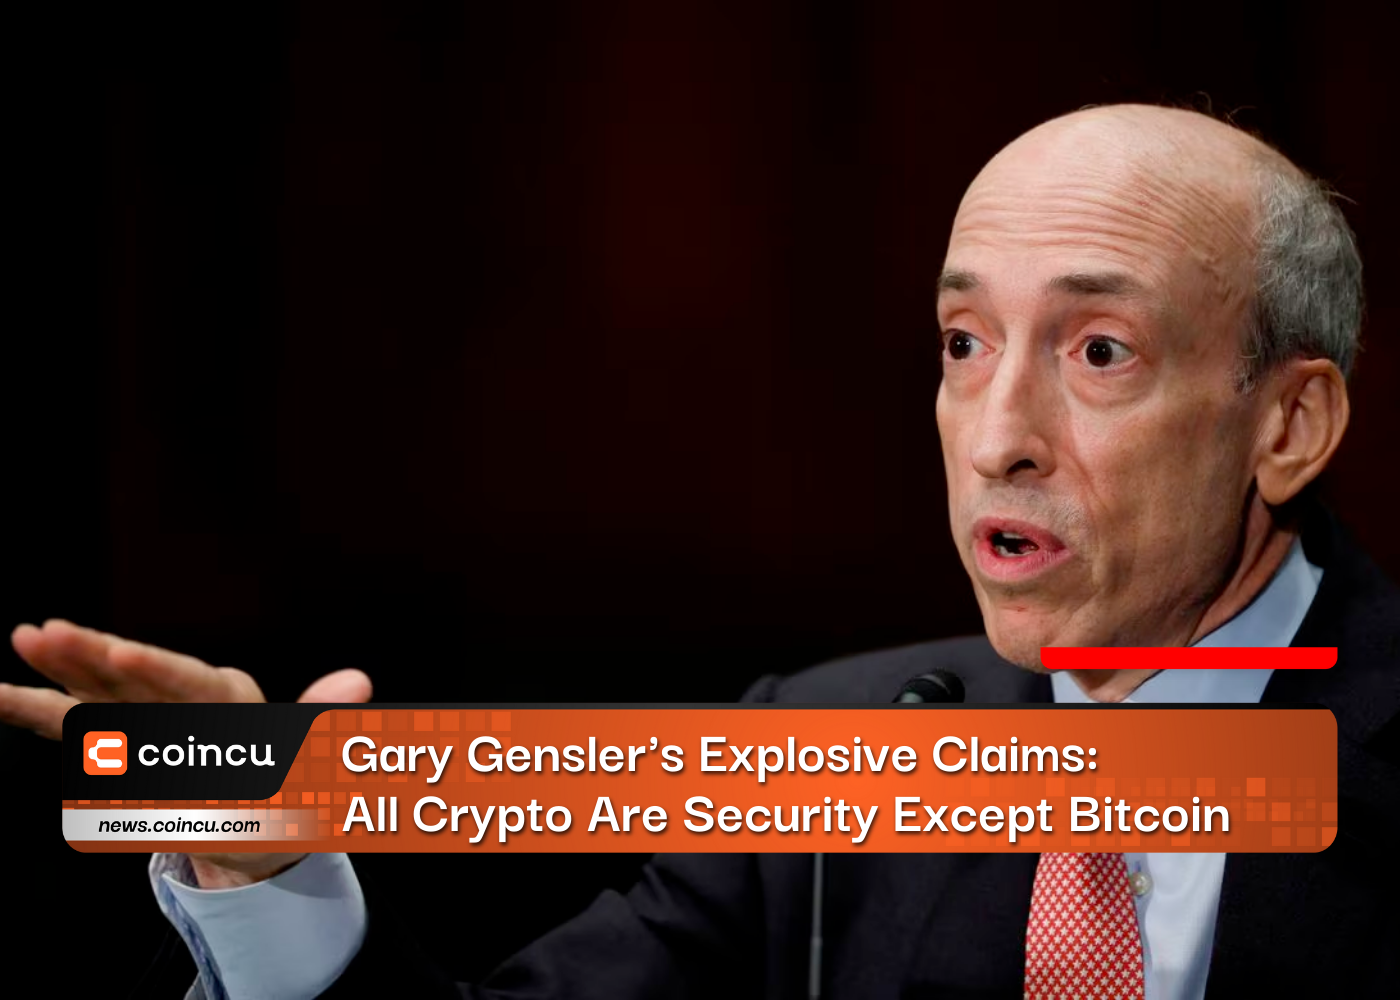 Gary Gensler's Explosive Claims: All Crypto Are Security Except Bitcoin